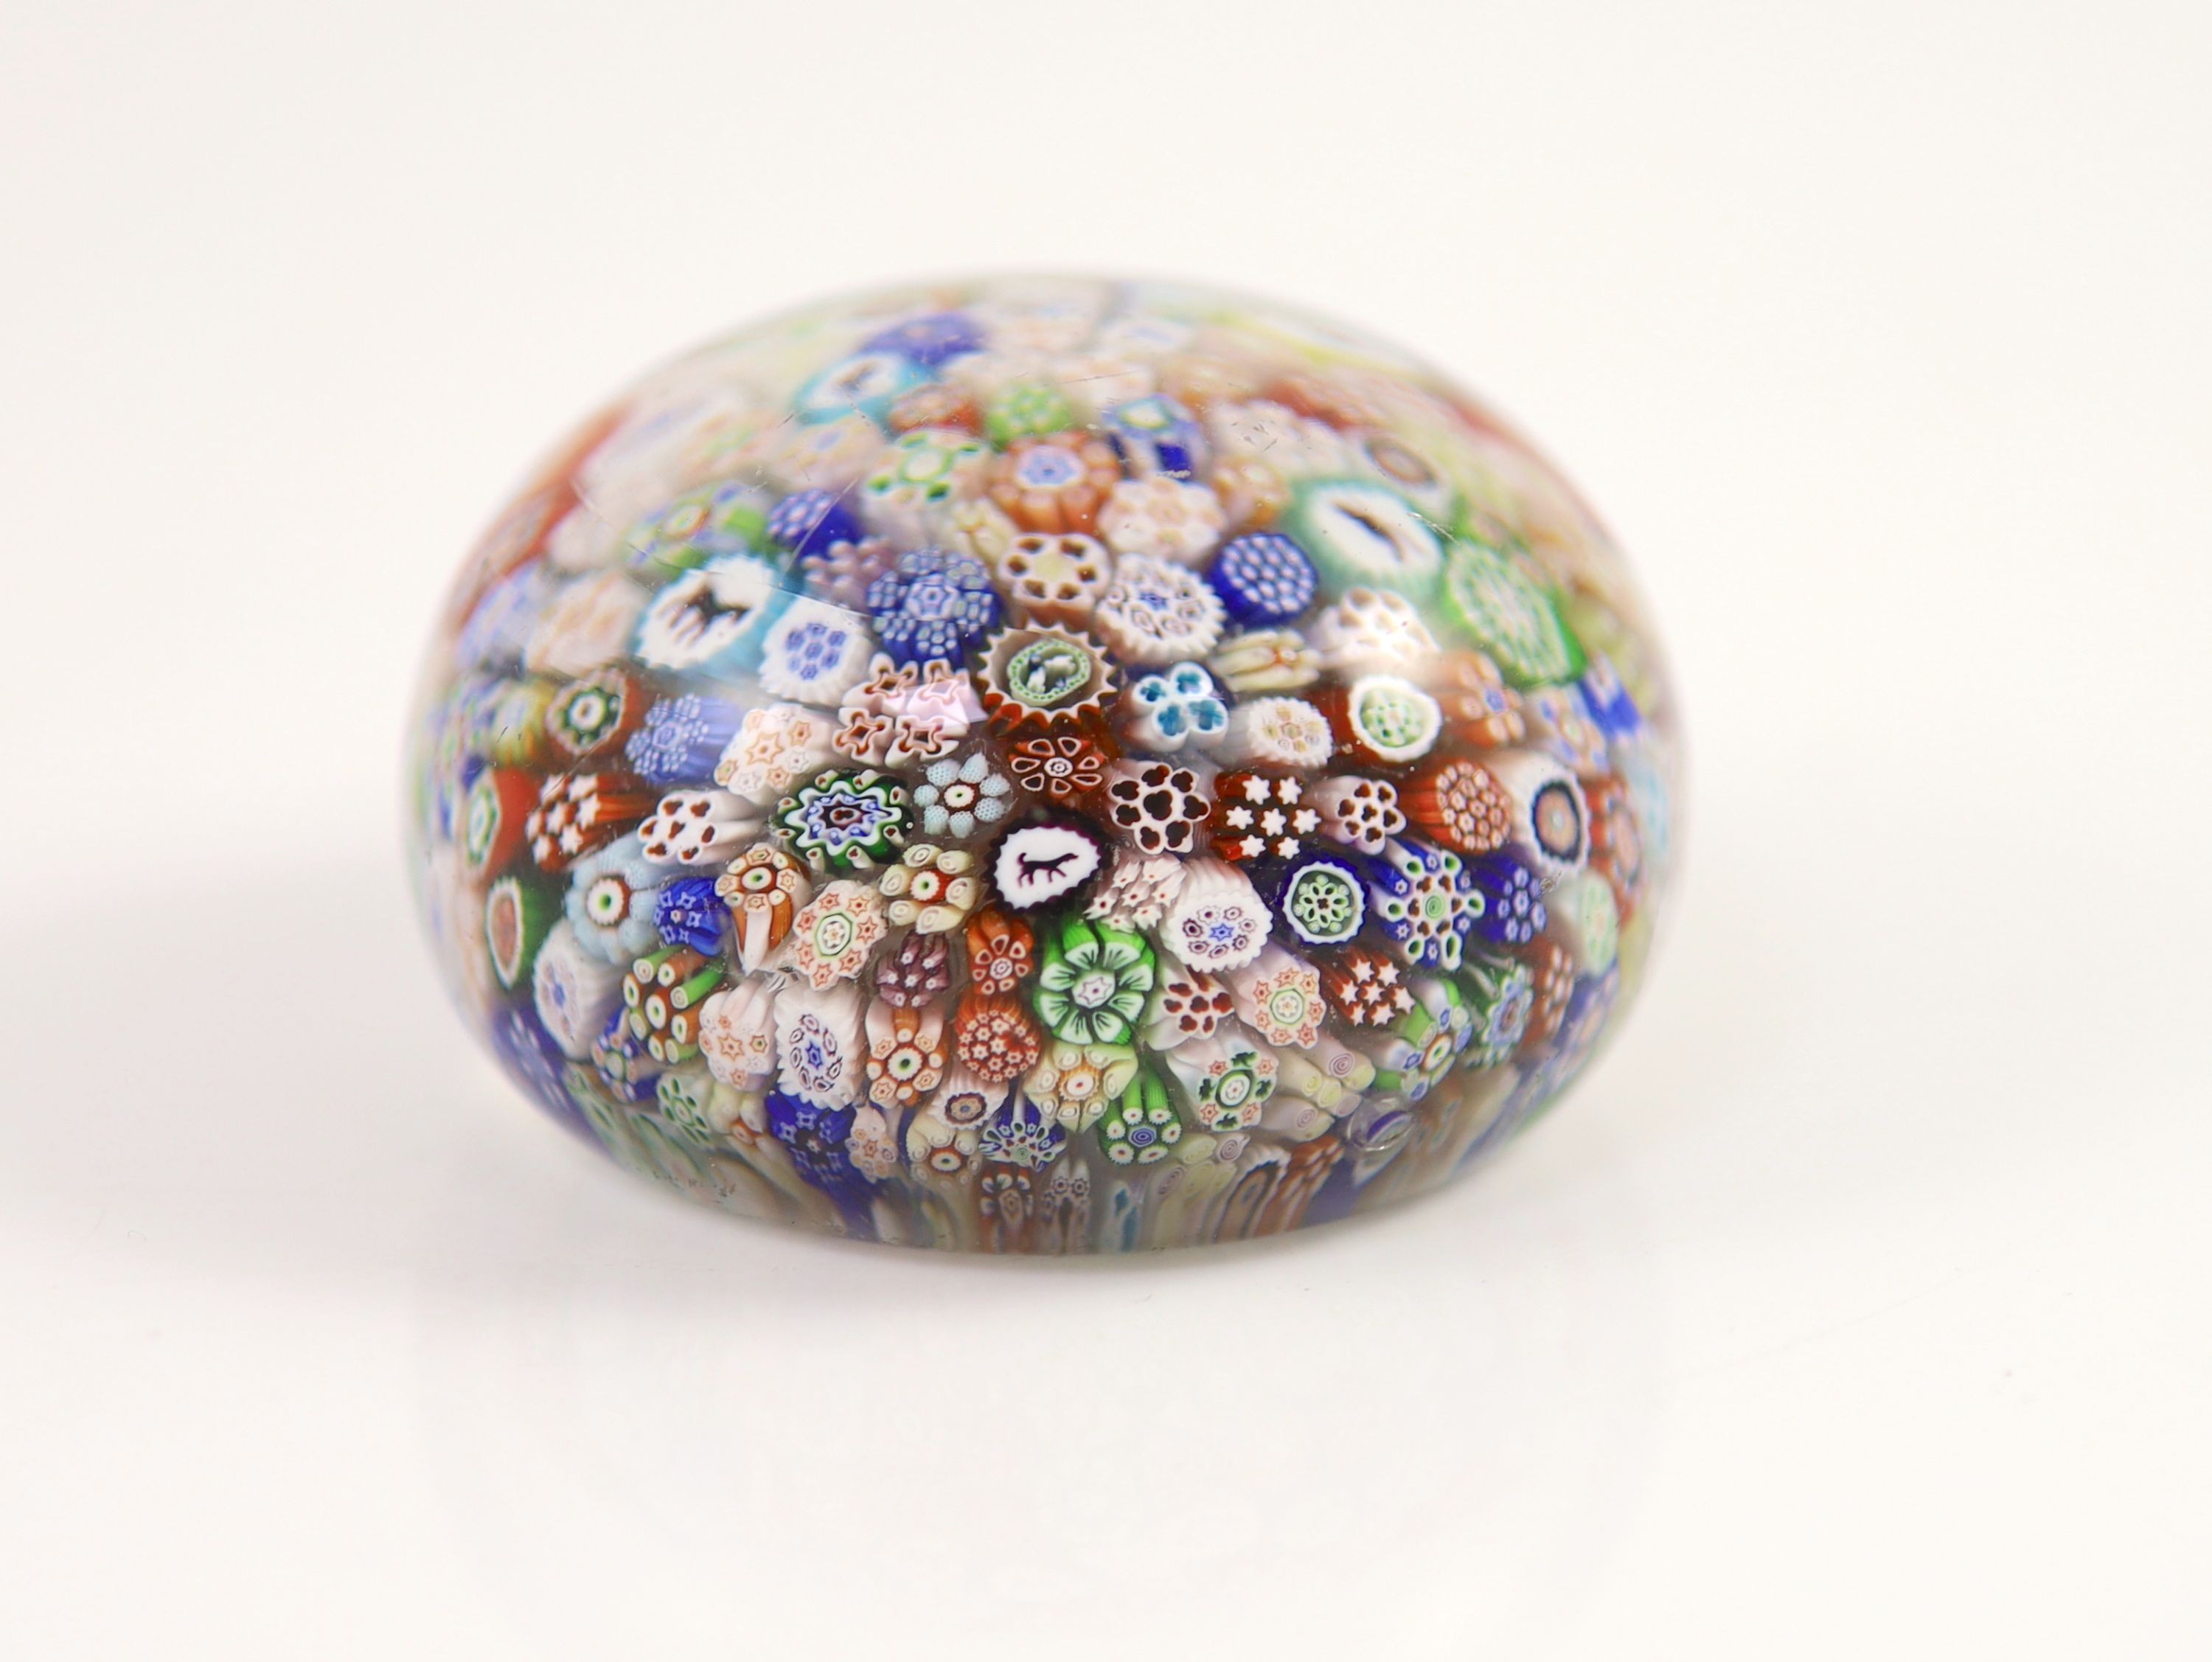 A Baccarat close packed millefiori glass paperweight, dated 1848, diameter 6.5cm